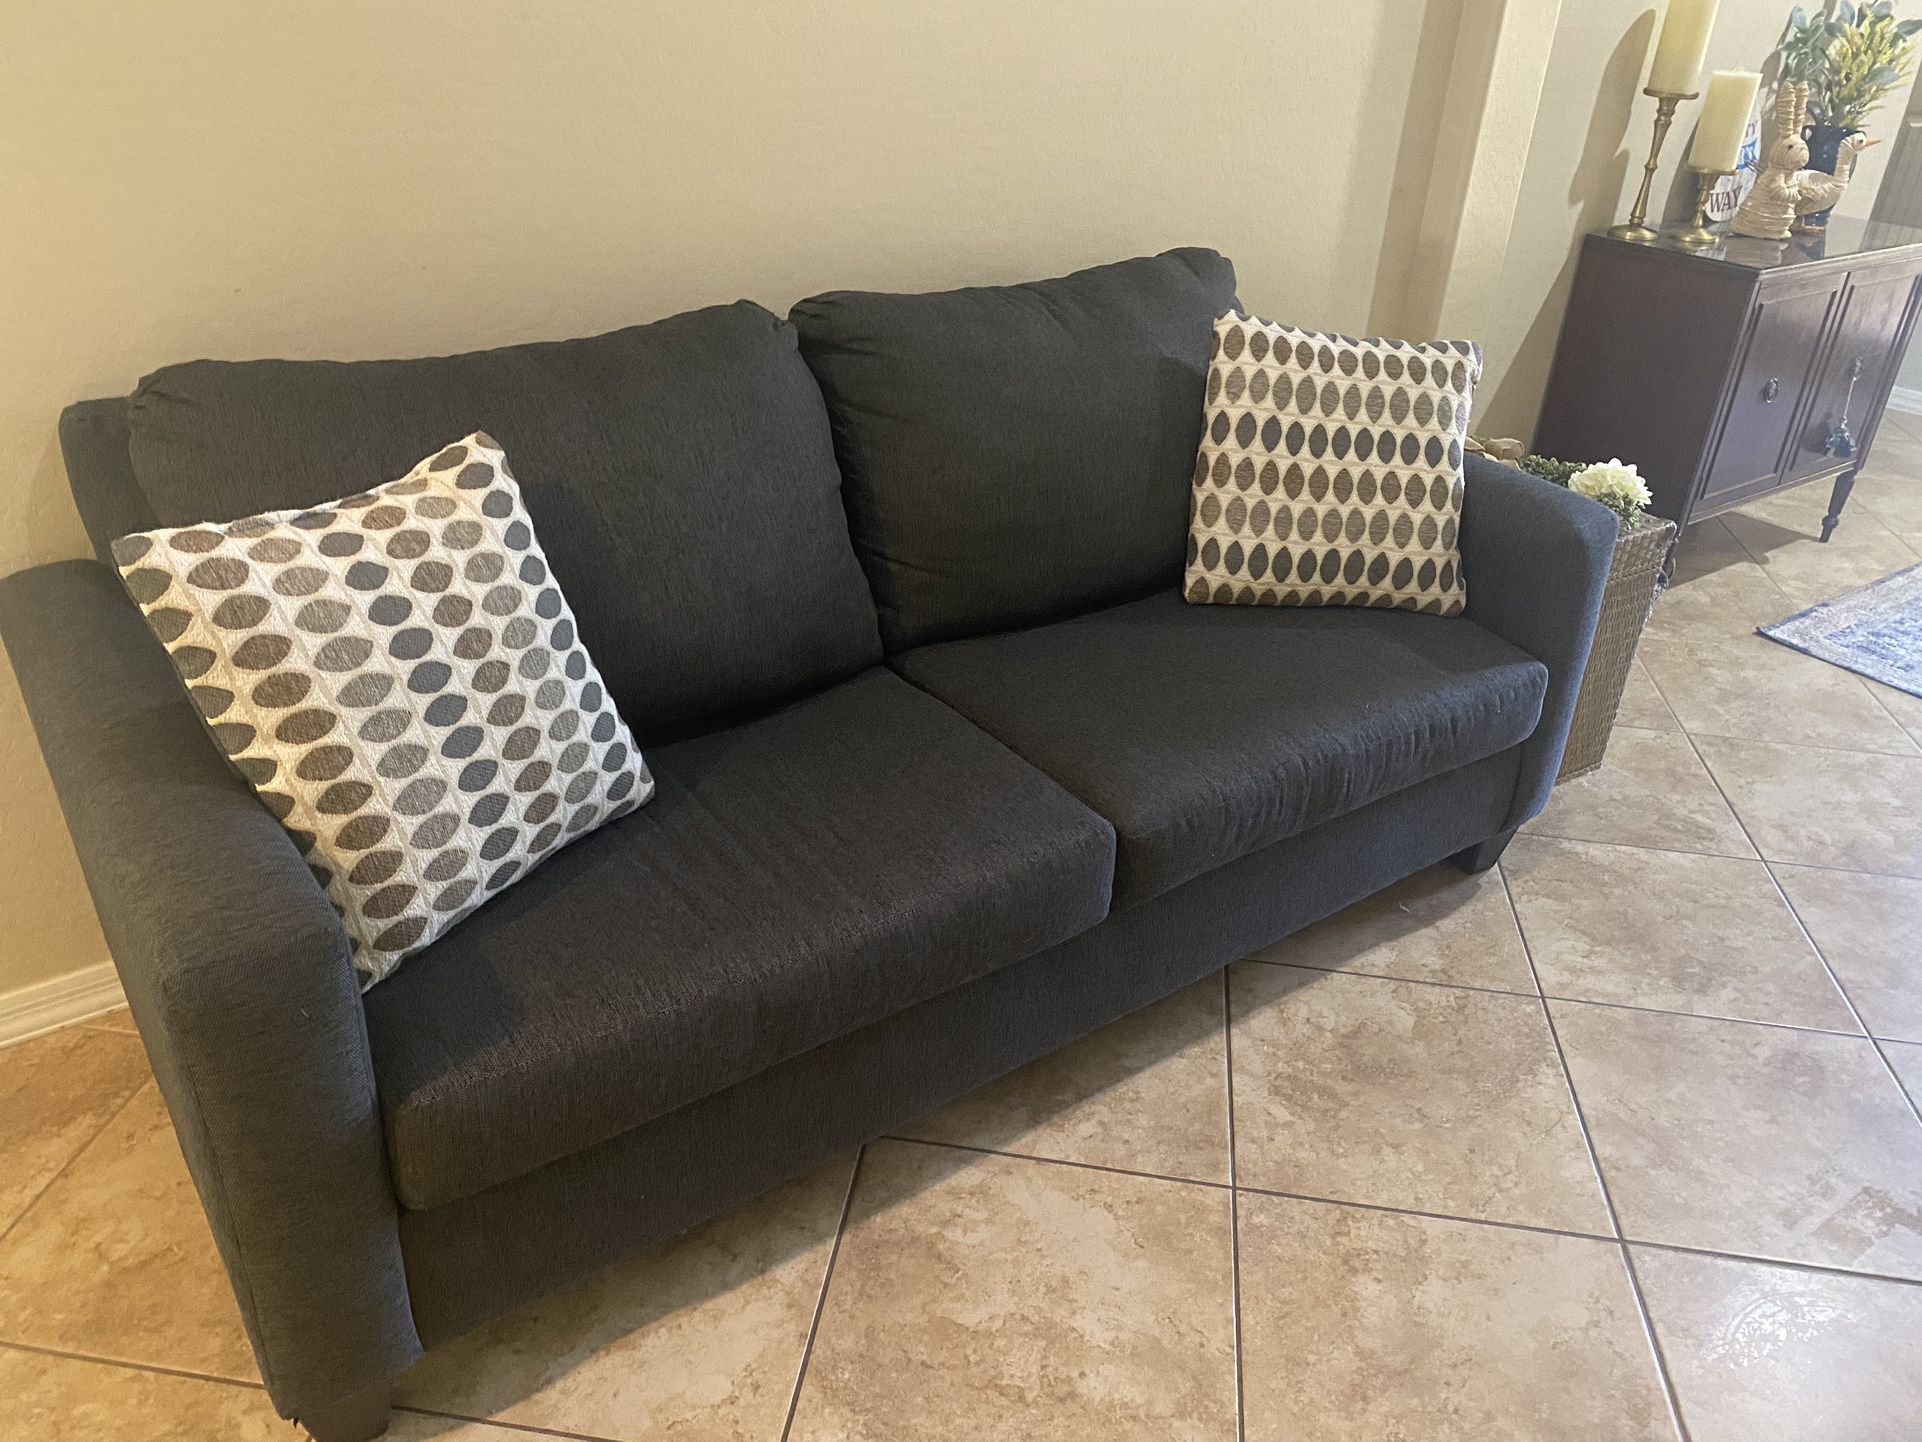 Like New - Charcoal grey Sofa/couch